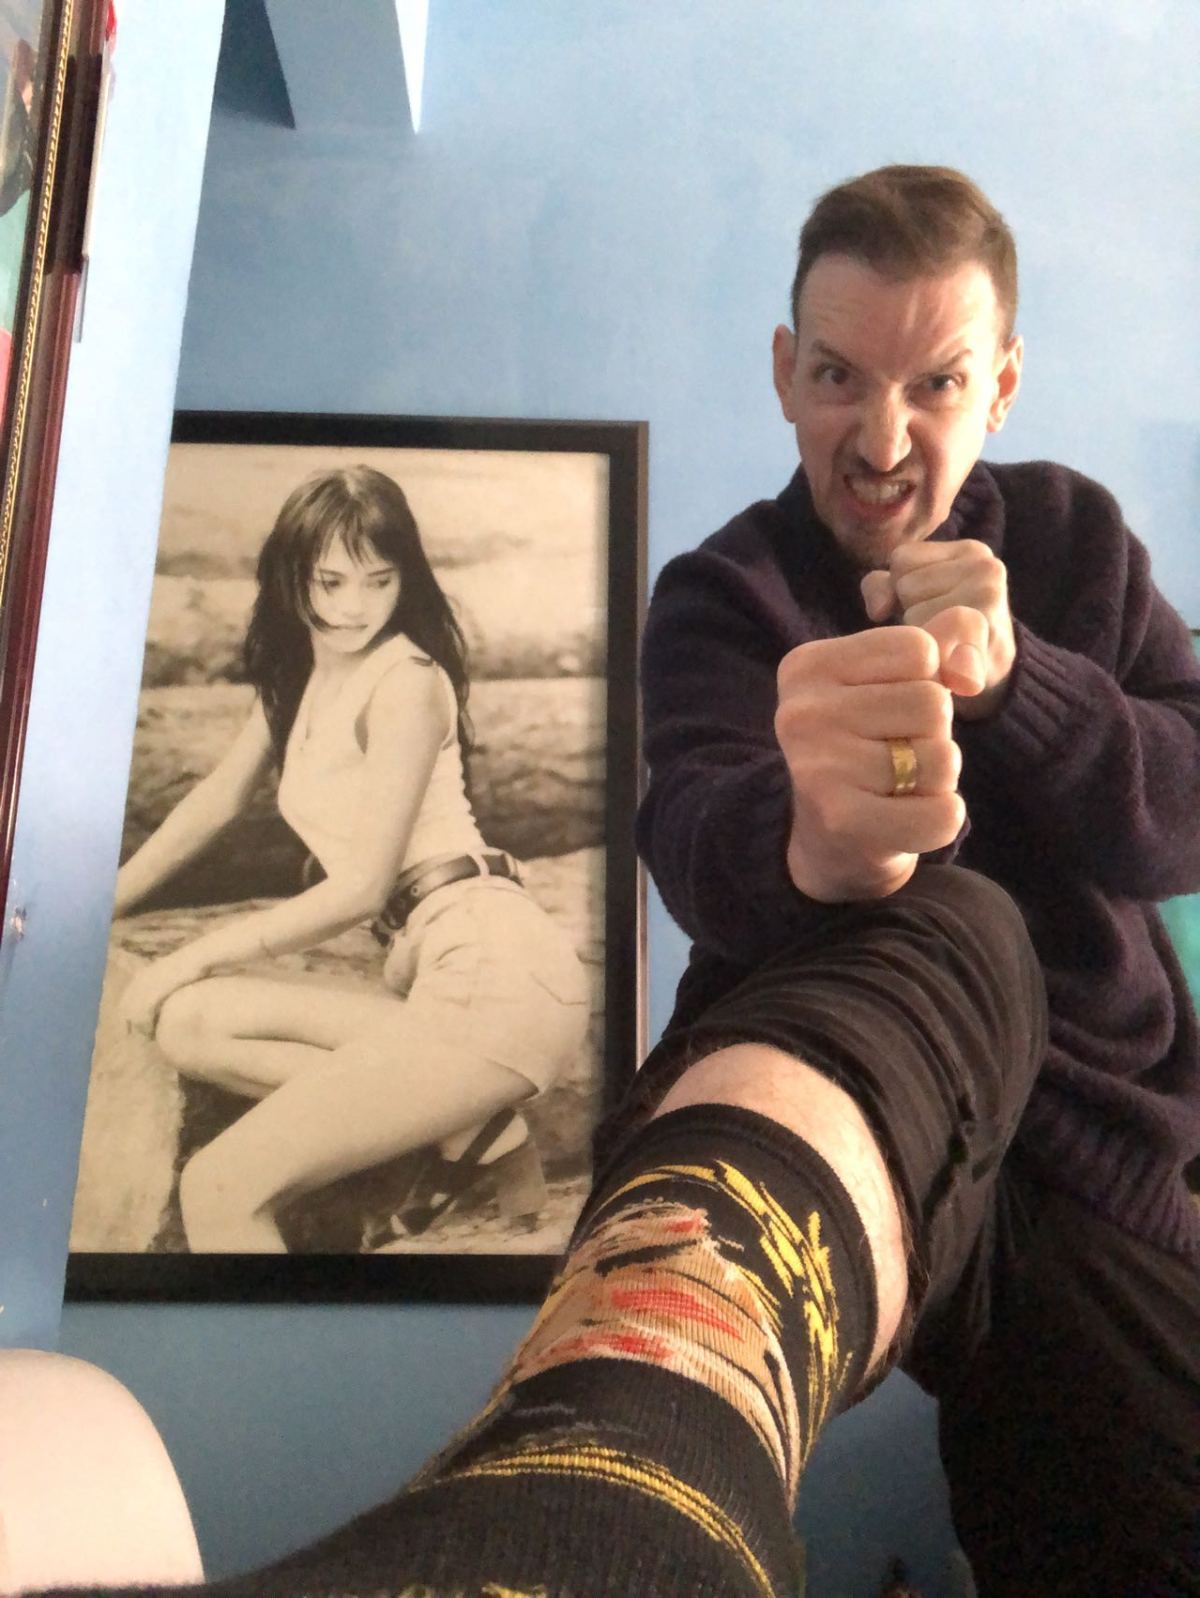 The most amazing Bruce Lee socks ... a reward for a job well done!